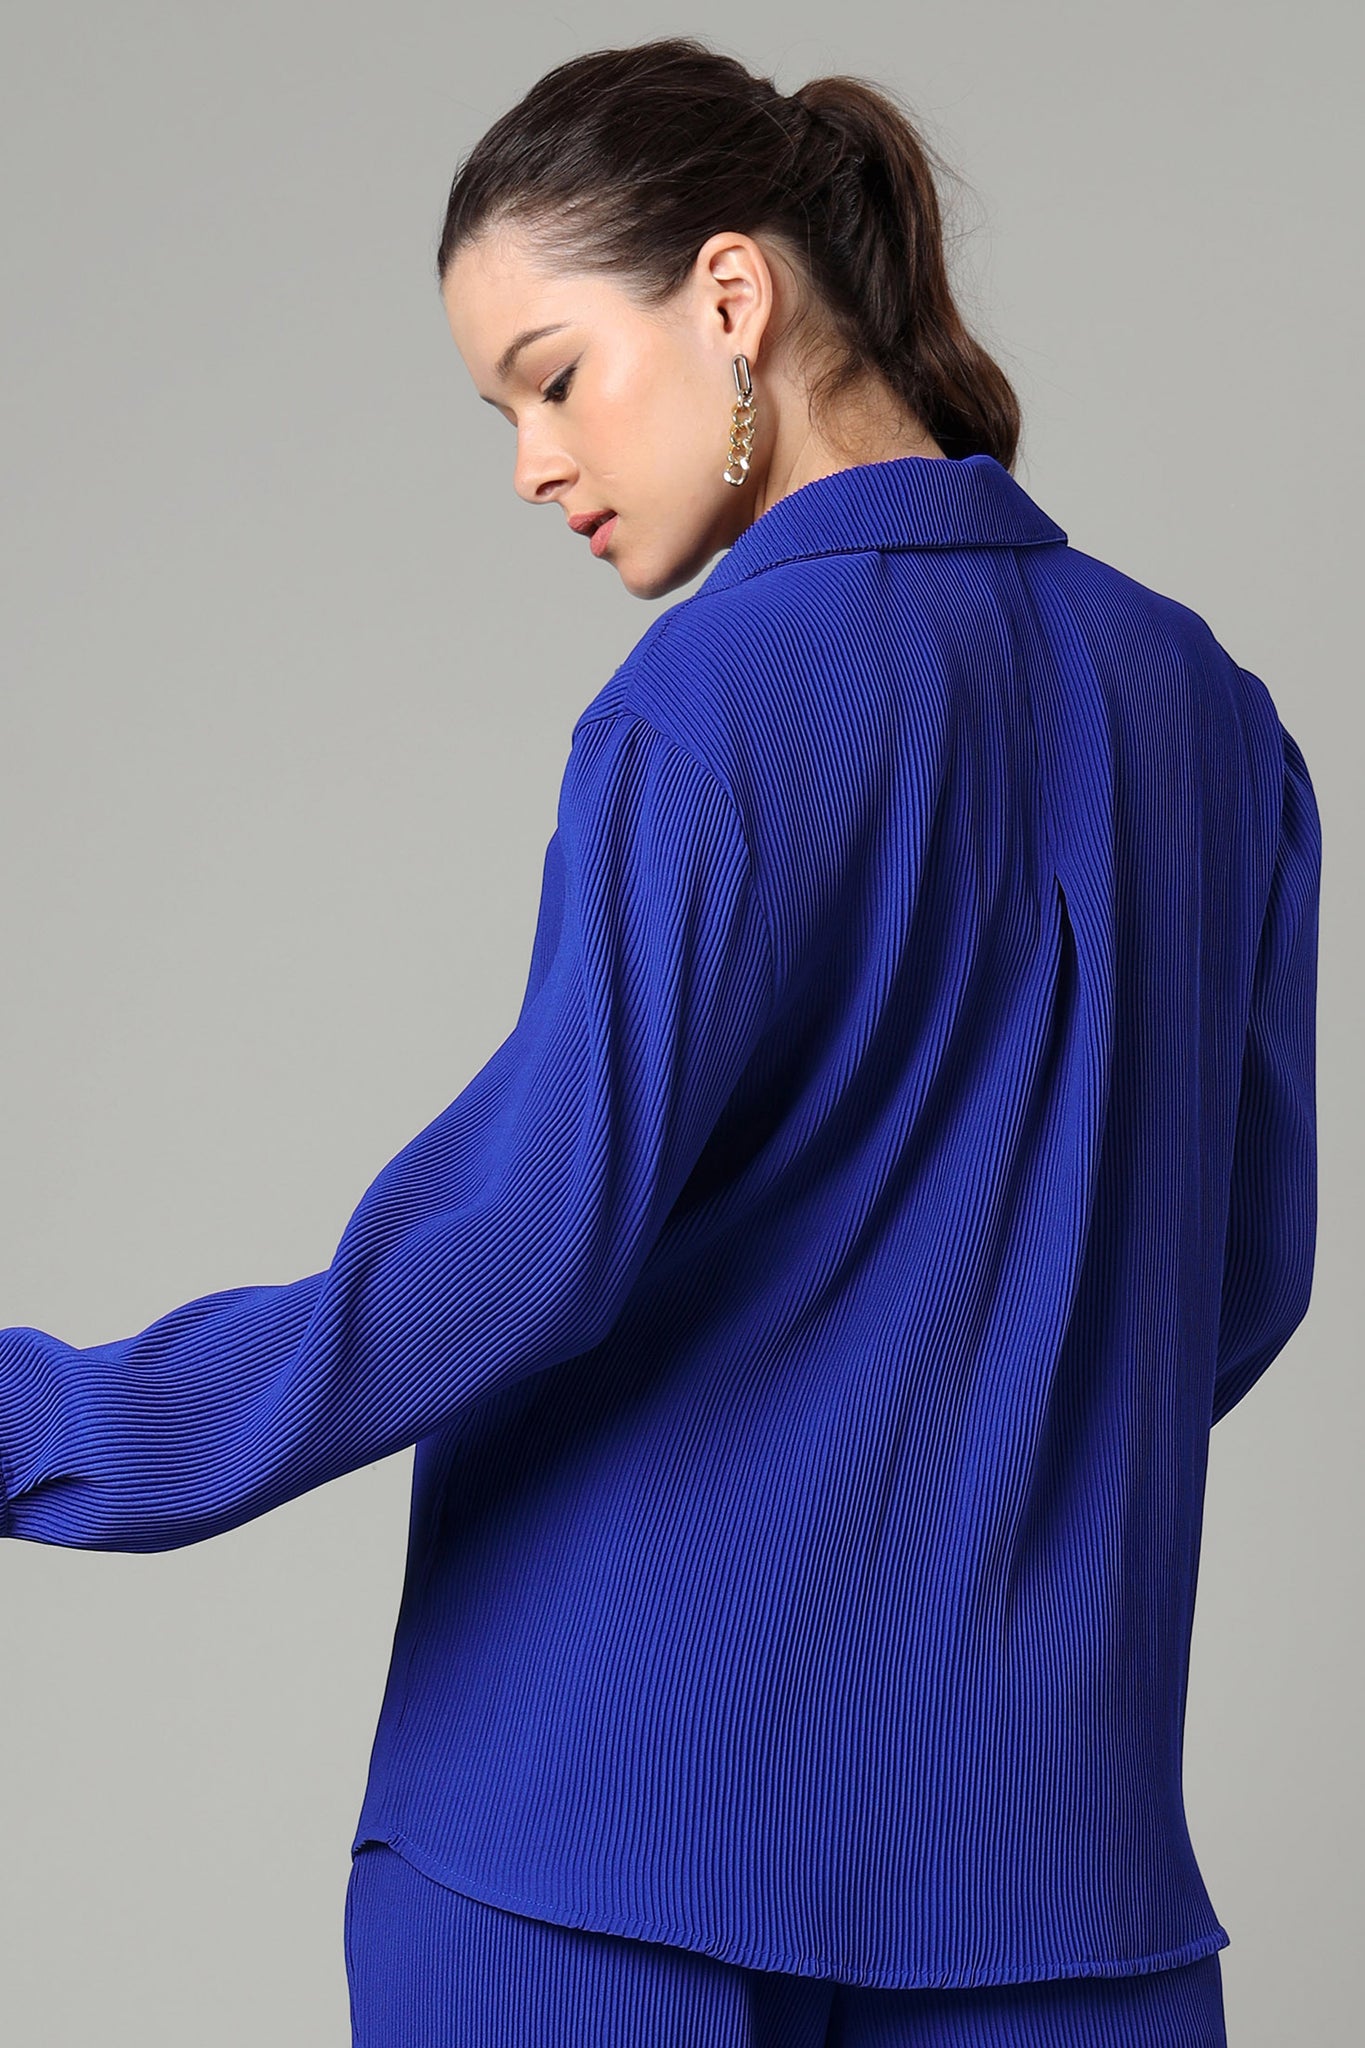 Exclusive Royal Pleated Shirt For Women